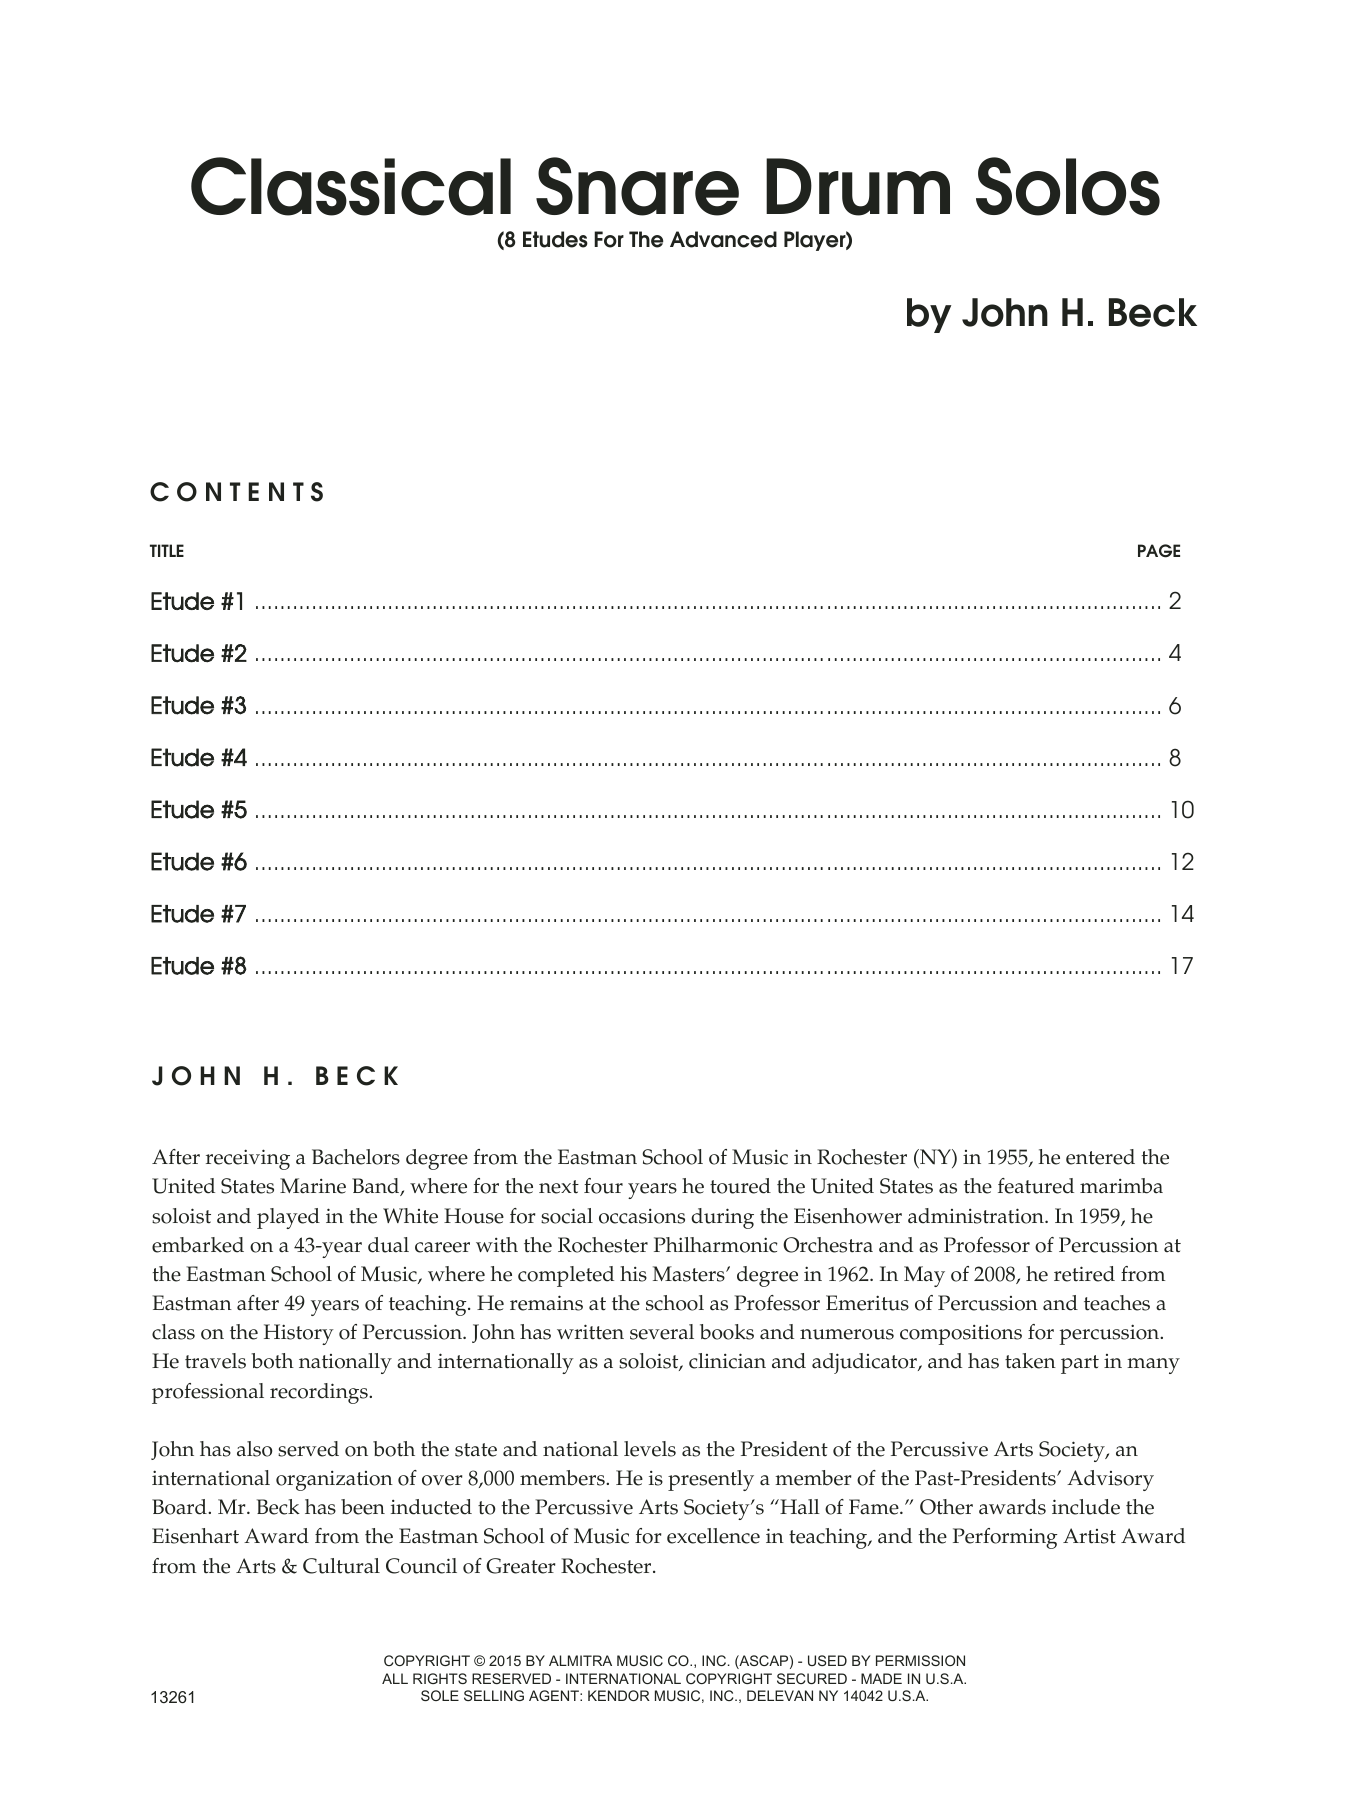 Download John H. Beck Classical Snare Drum Solos (8 Etudes Fo Sheet Music